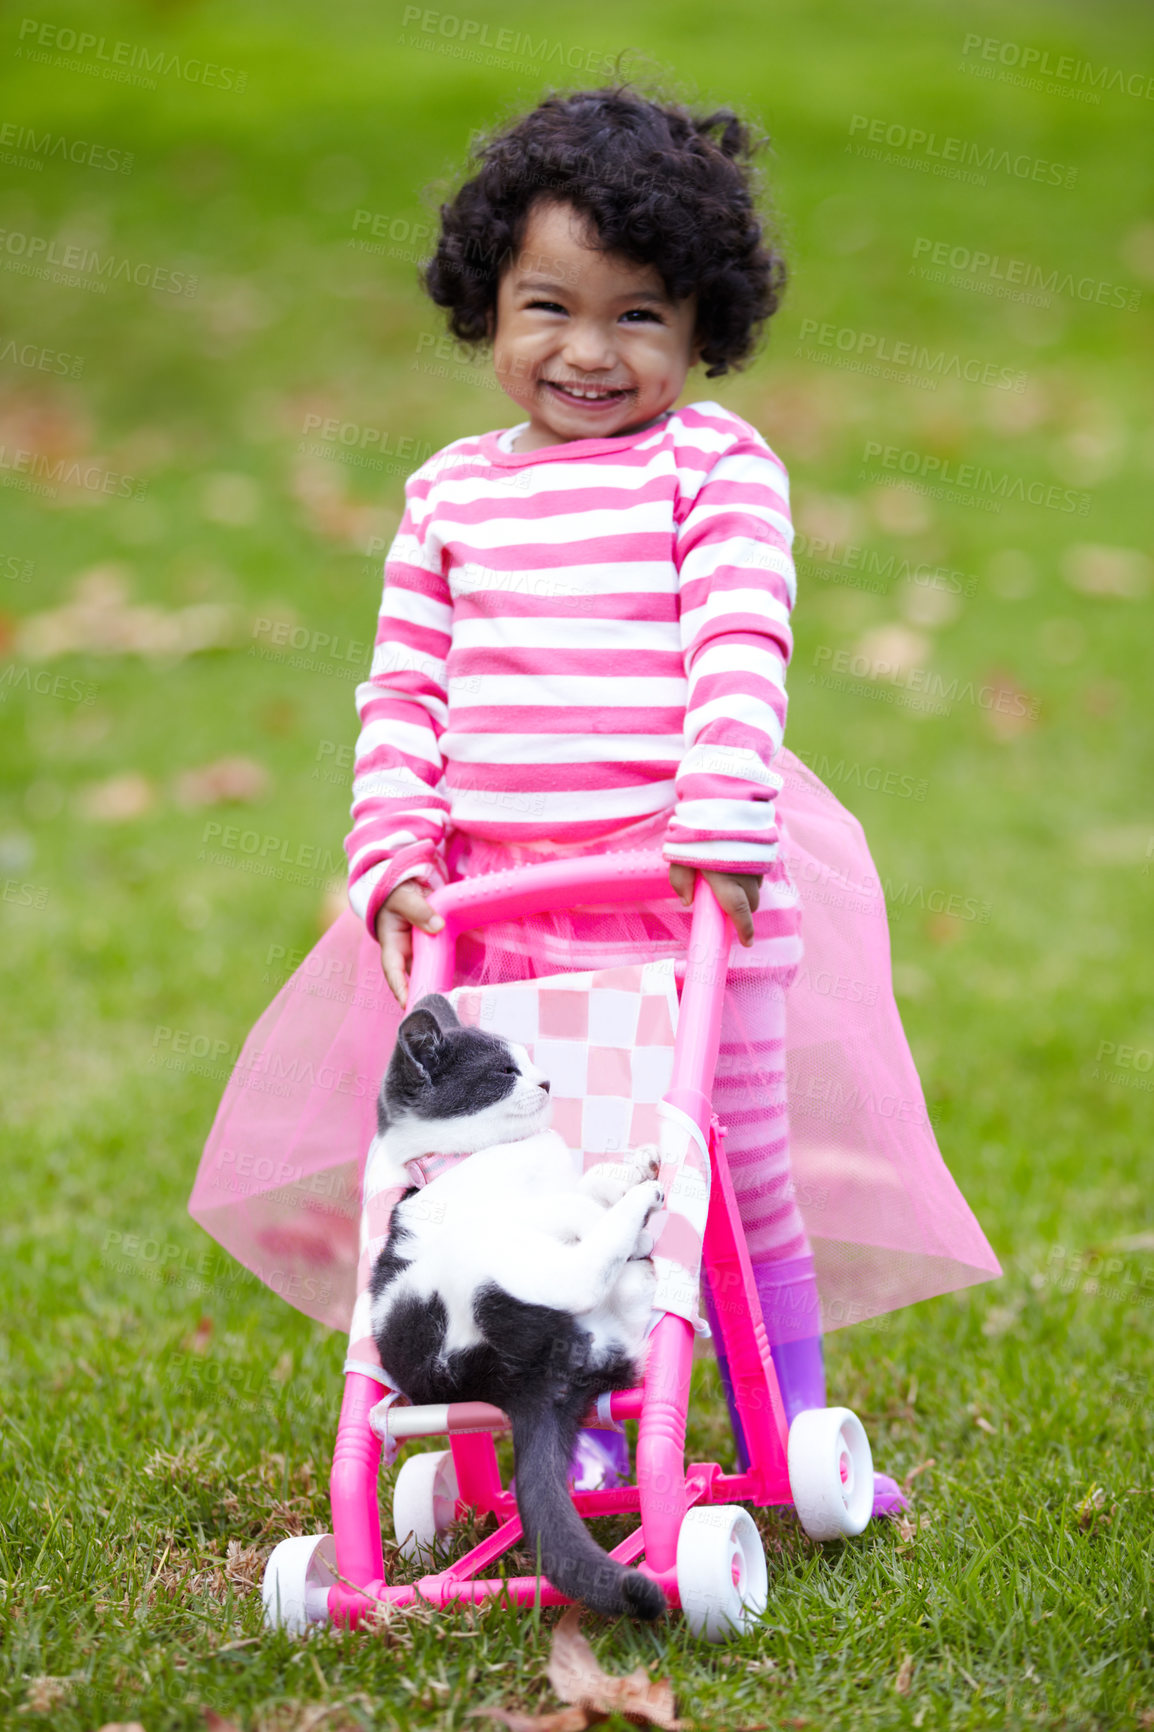 Buy stock photo Portrait, happy kid and kitten for playing with baby carriage on grass, garden or backyard of family home. Little girl, pet and pushing of stroller together for fun, imagine or game for bond by care